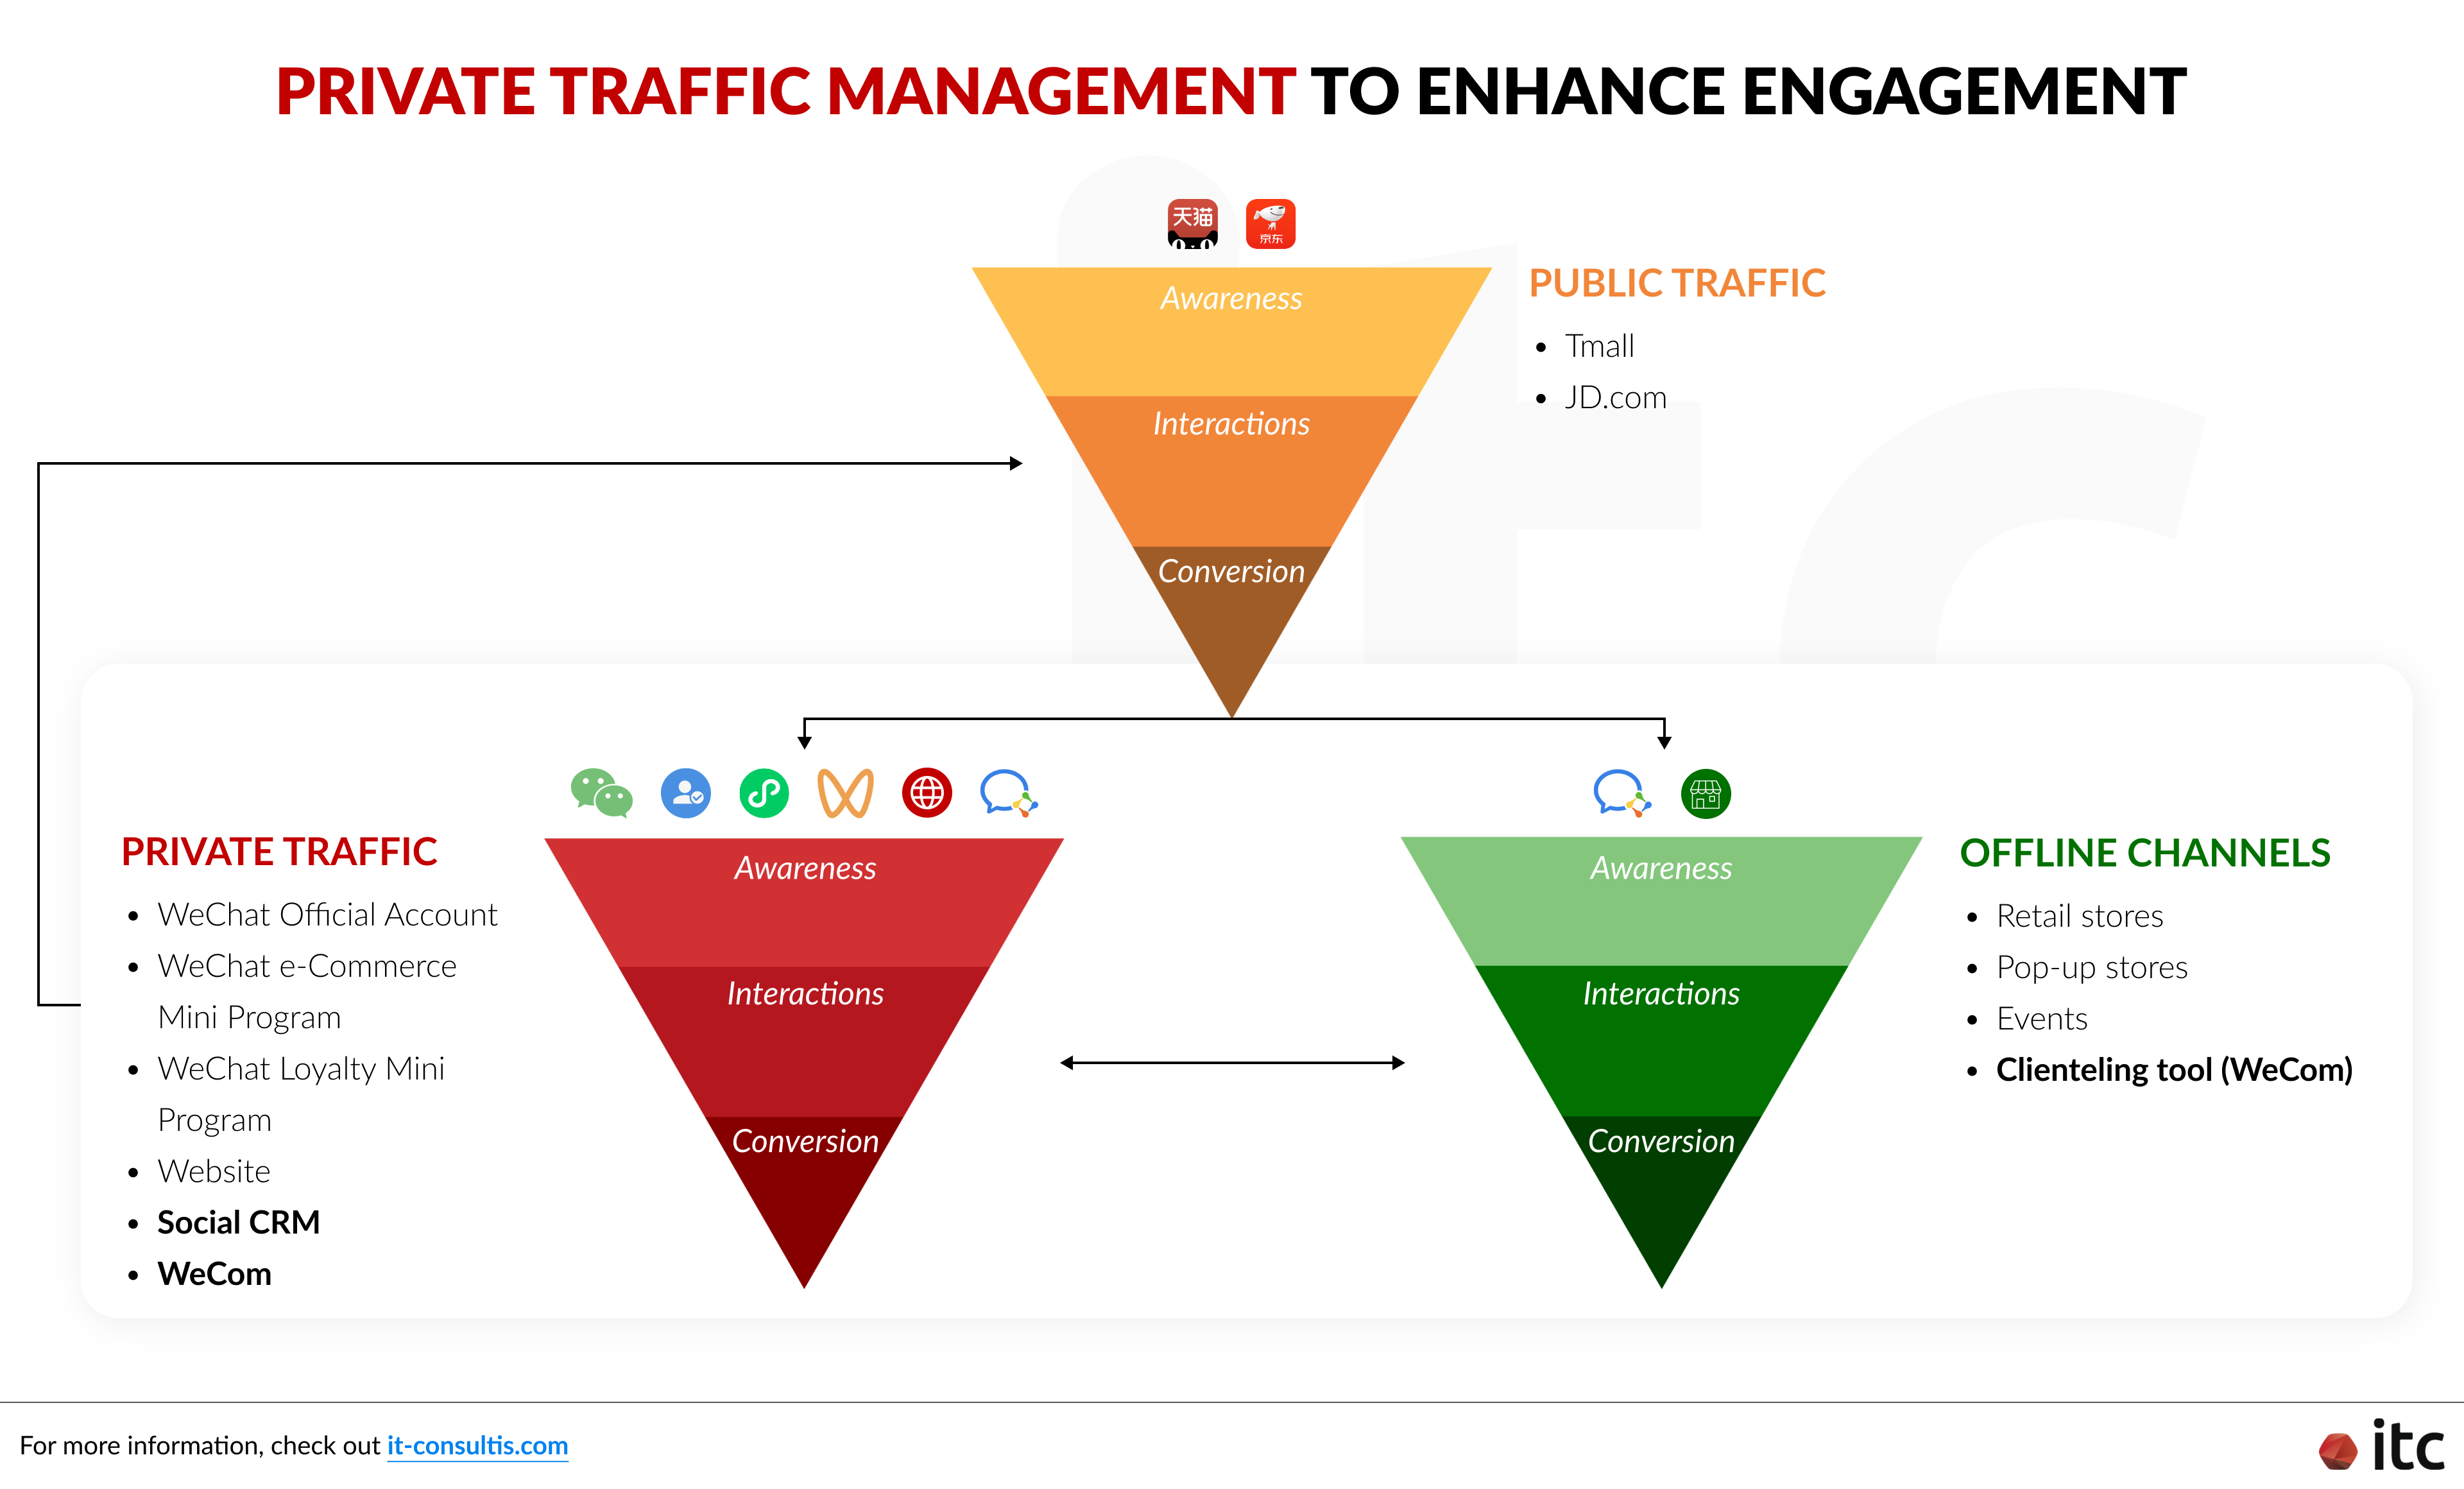 Private traffic management is the foundation for brands to build more comprehensive CRM